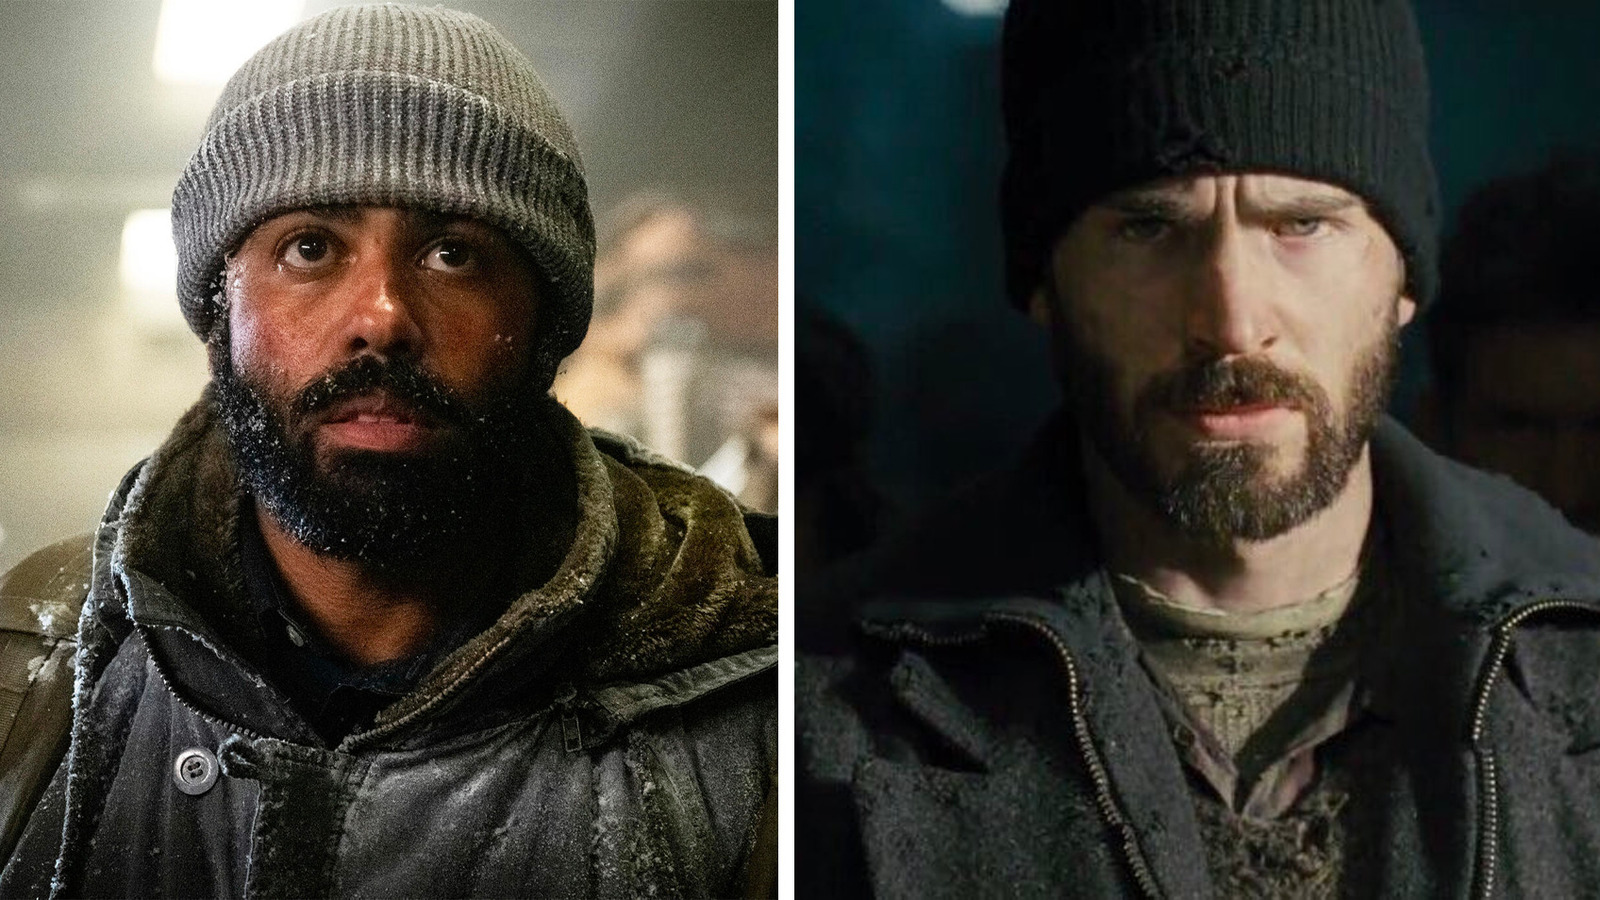 https://www.slashfilm.com/img/gallery/the-timeline-difference-between-the-snowpiercer-tv-series-and-movie/l-intro-1644251865.jpg